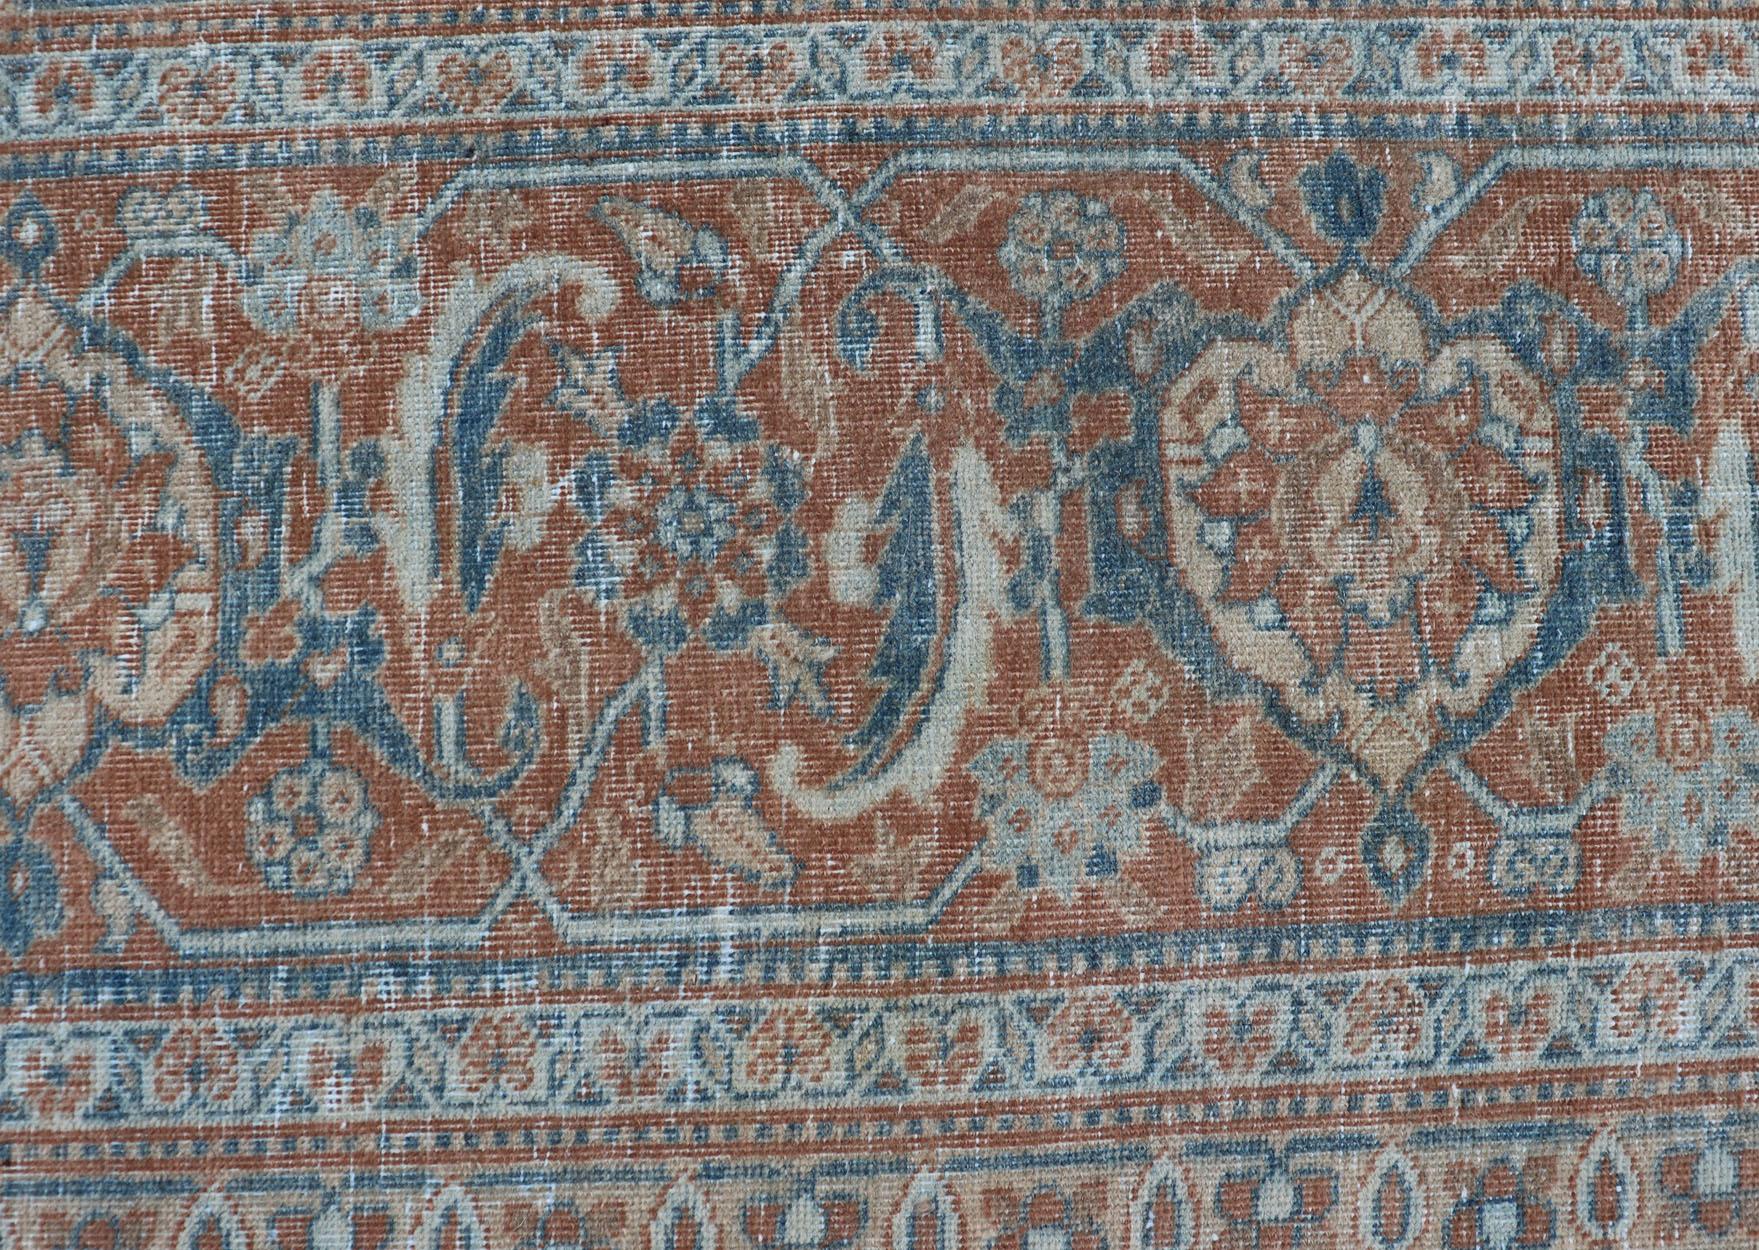 Large Antique Persian Tabriz Carpet with Herati Design in Gray Blue & Orange Red For Sale 9